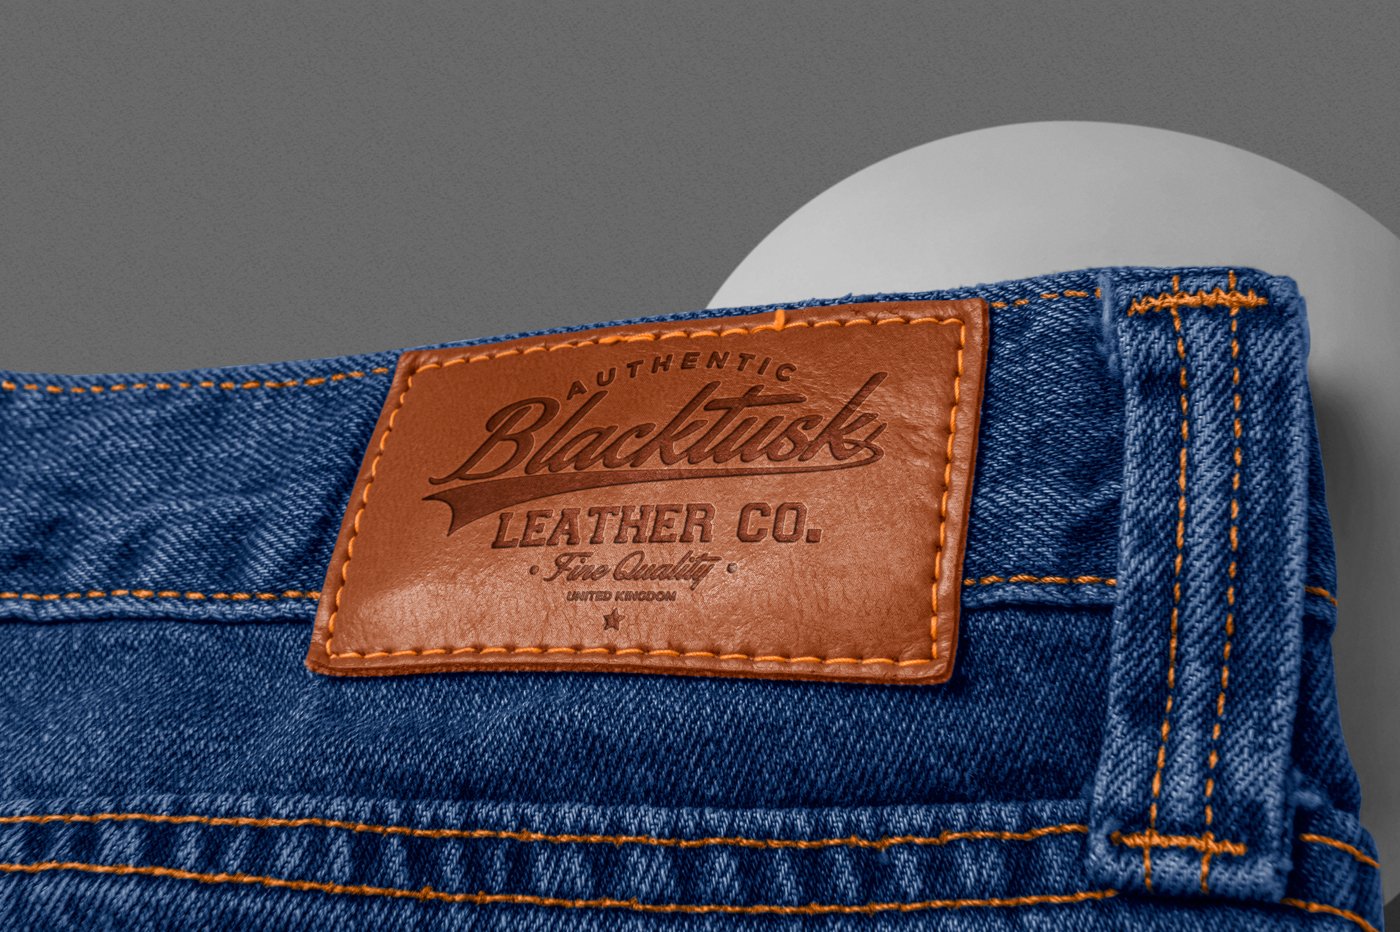 Jeans Leather Label Mockup cover image.